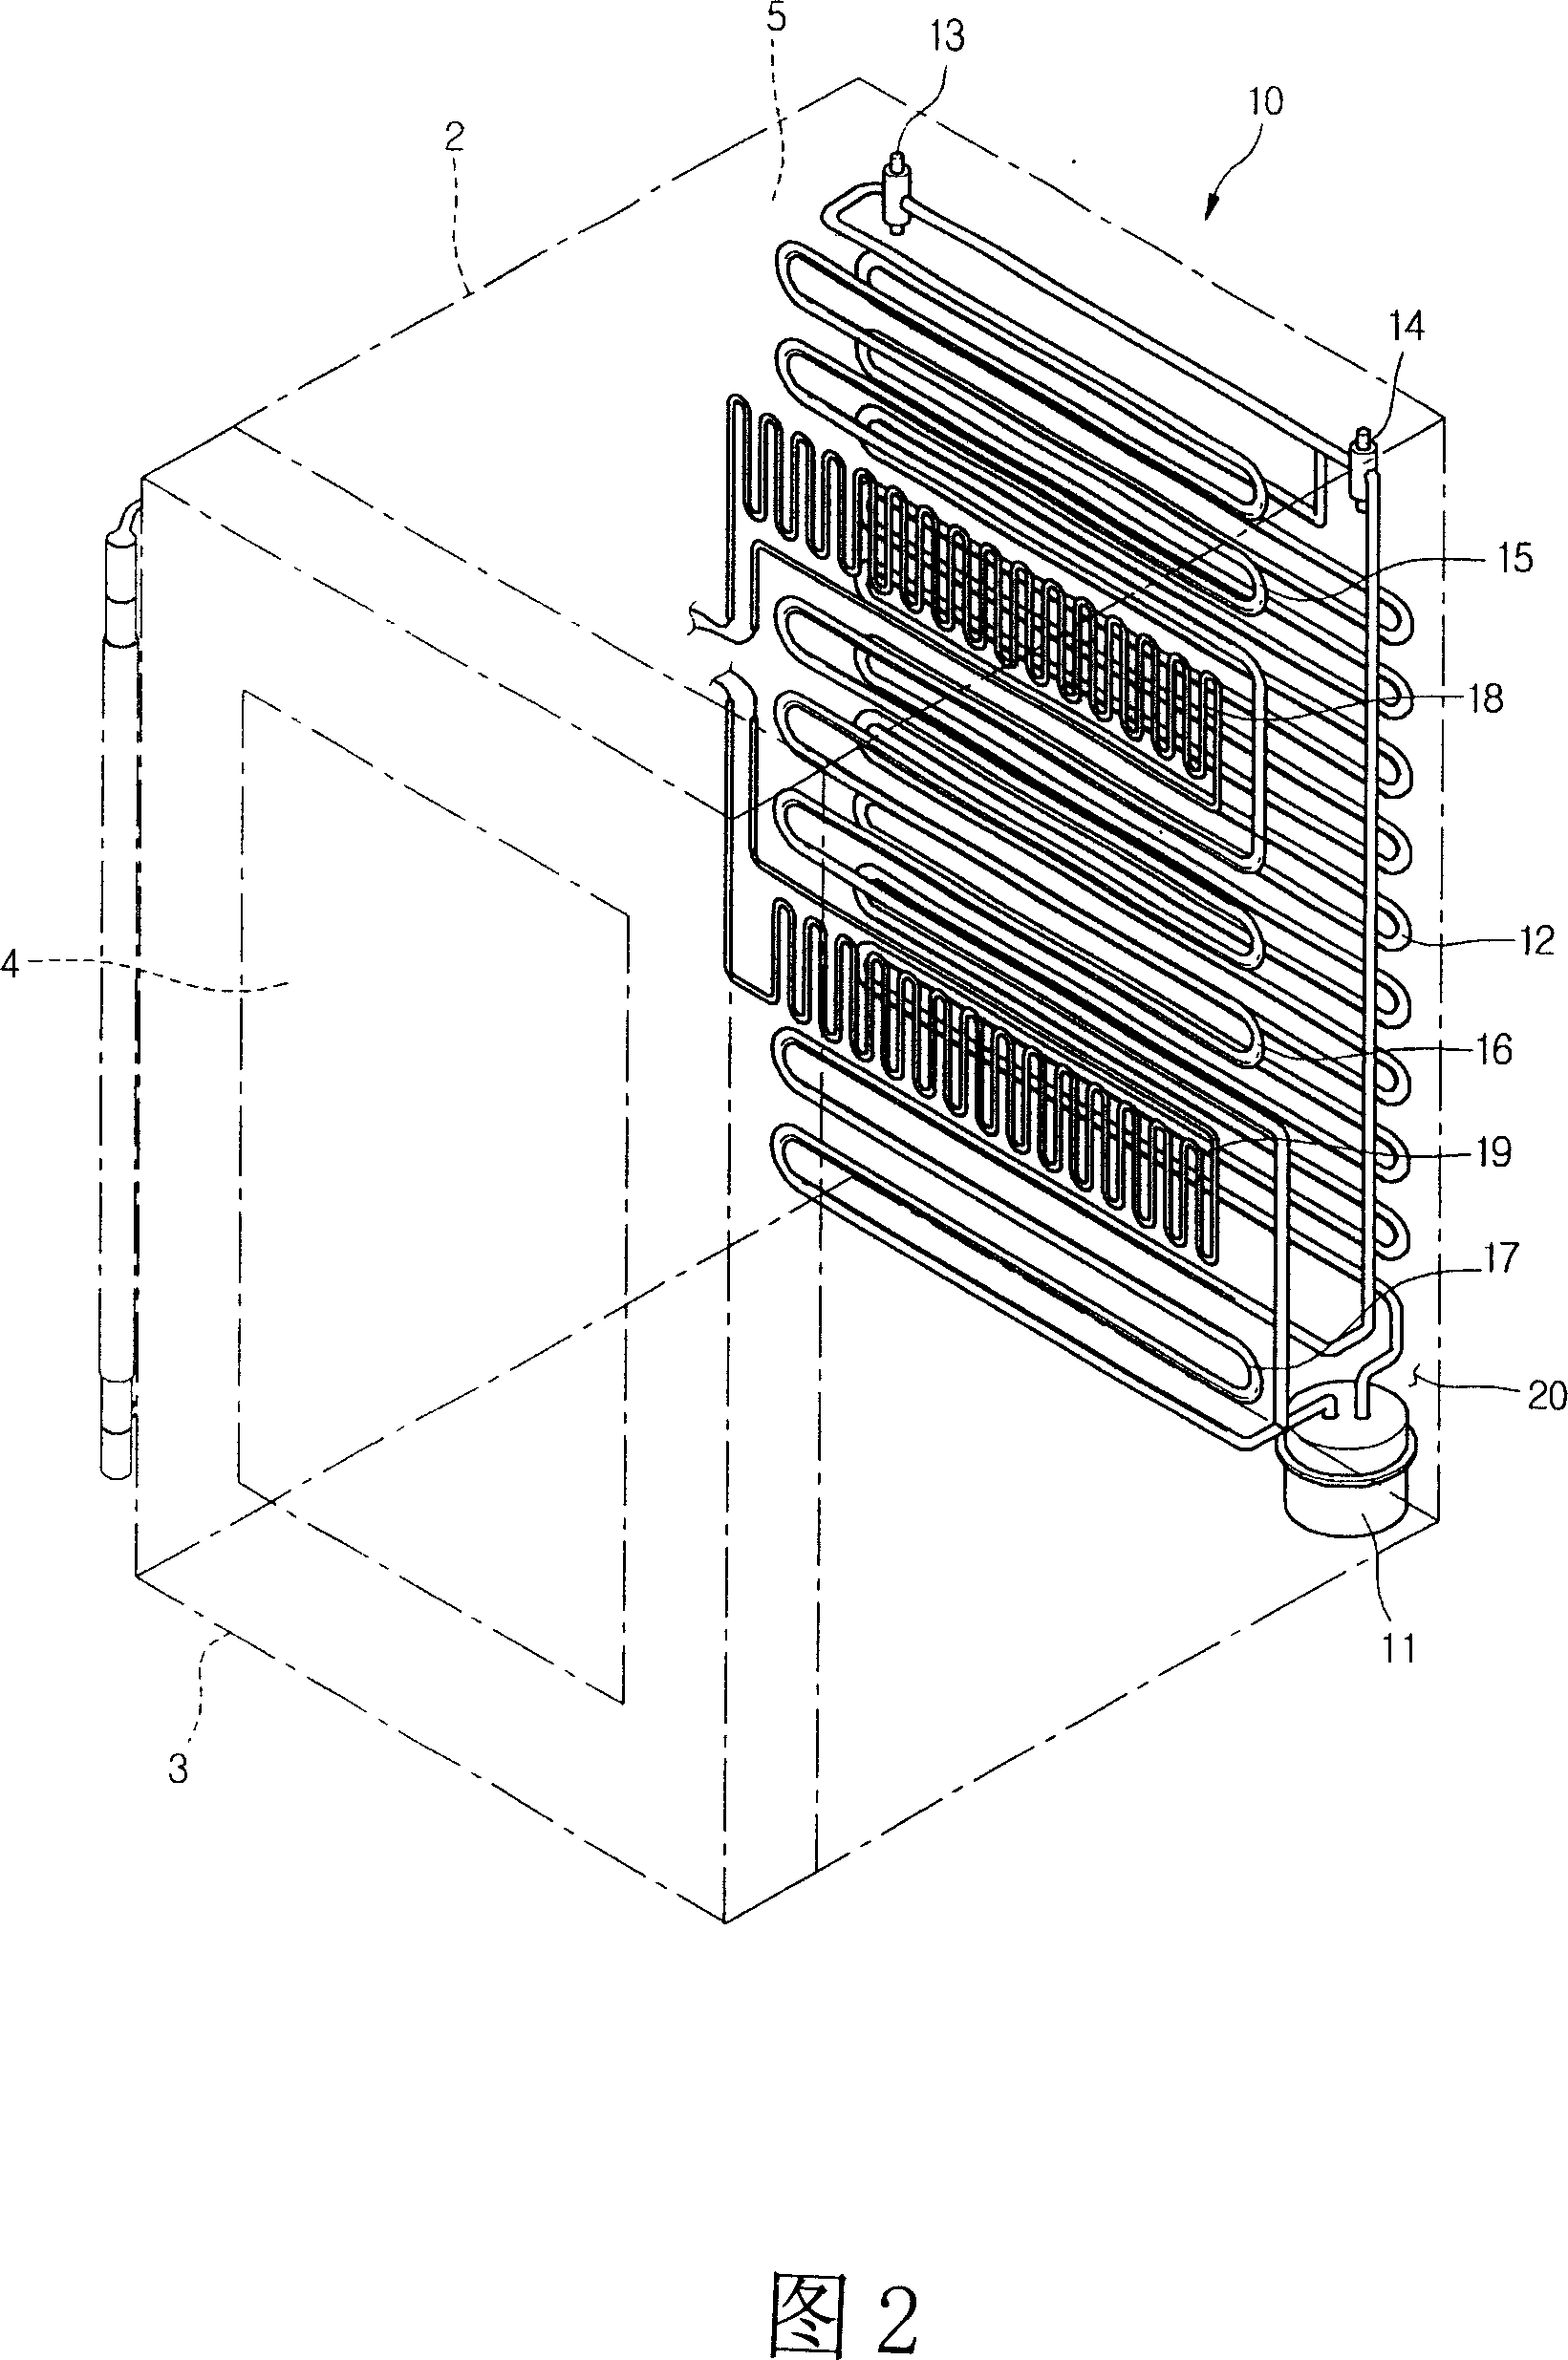 Structure of wine cabinet